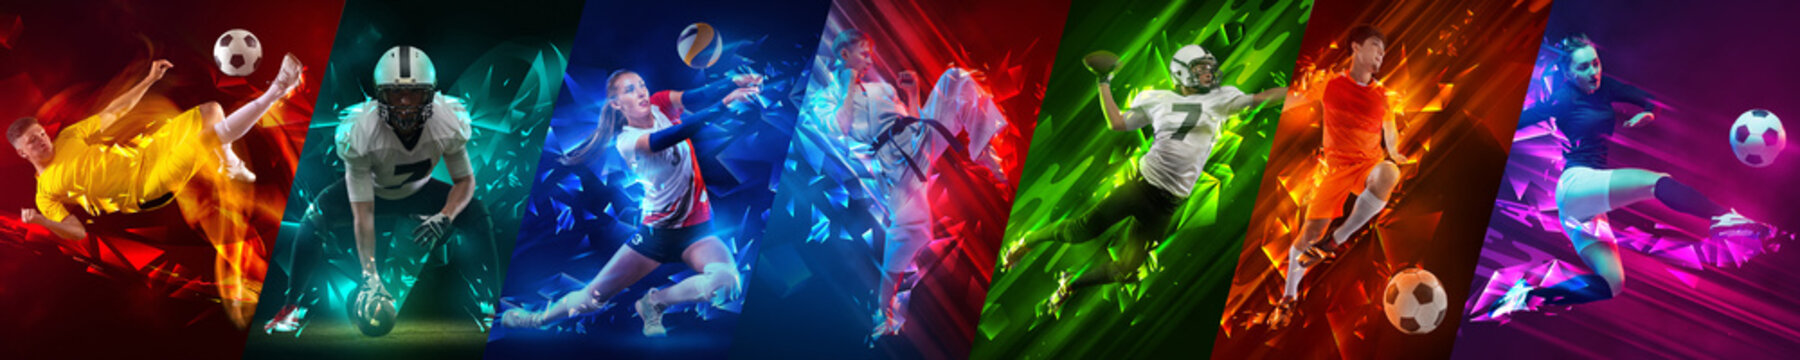 Collage made of people, men and women, athletes of different sports in motion during game over multicolored background in neon with polygonal elements. Sport, competition, tournament, dynamics concept